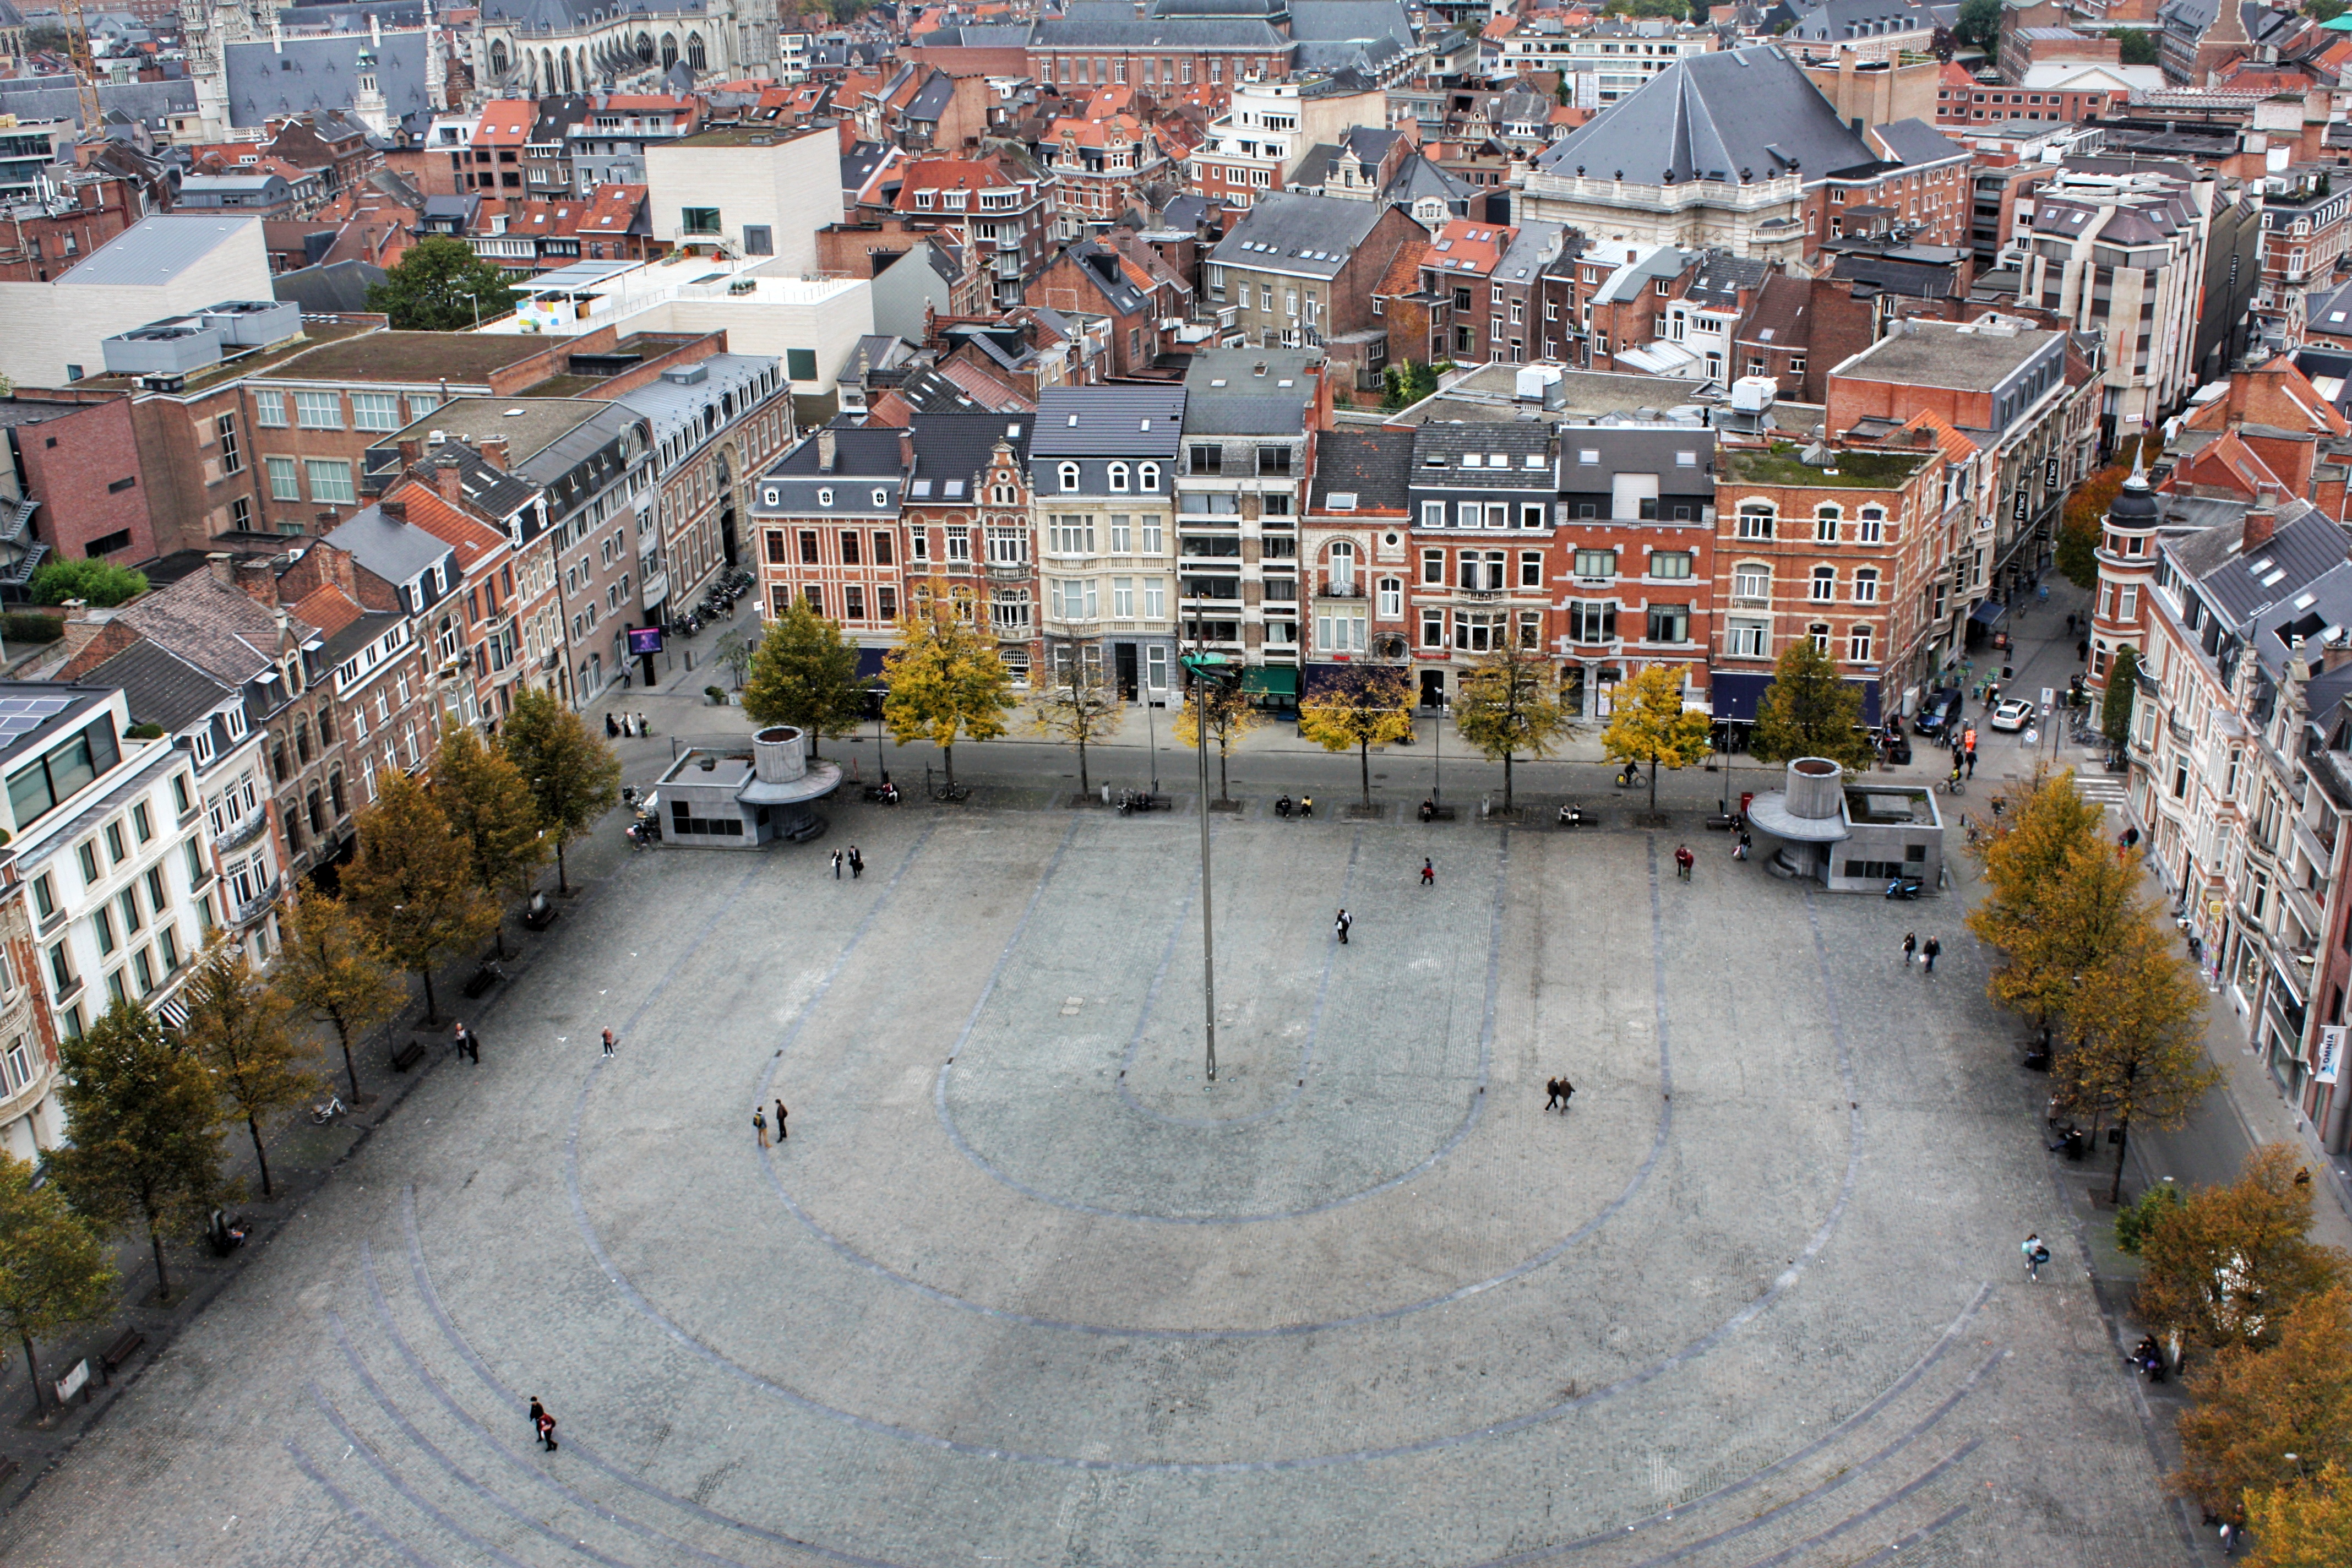 View from the top of the University Bell tower Leuven, read more about what you can do in Leuven in 48 hours at www.whatsupcourtney.com #Leuven #travel #travelguide